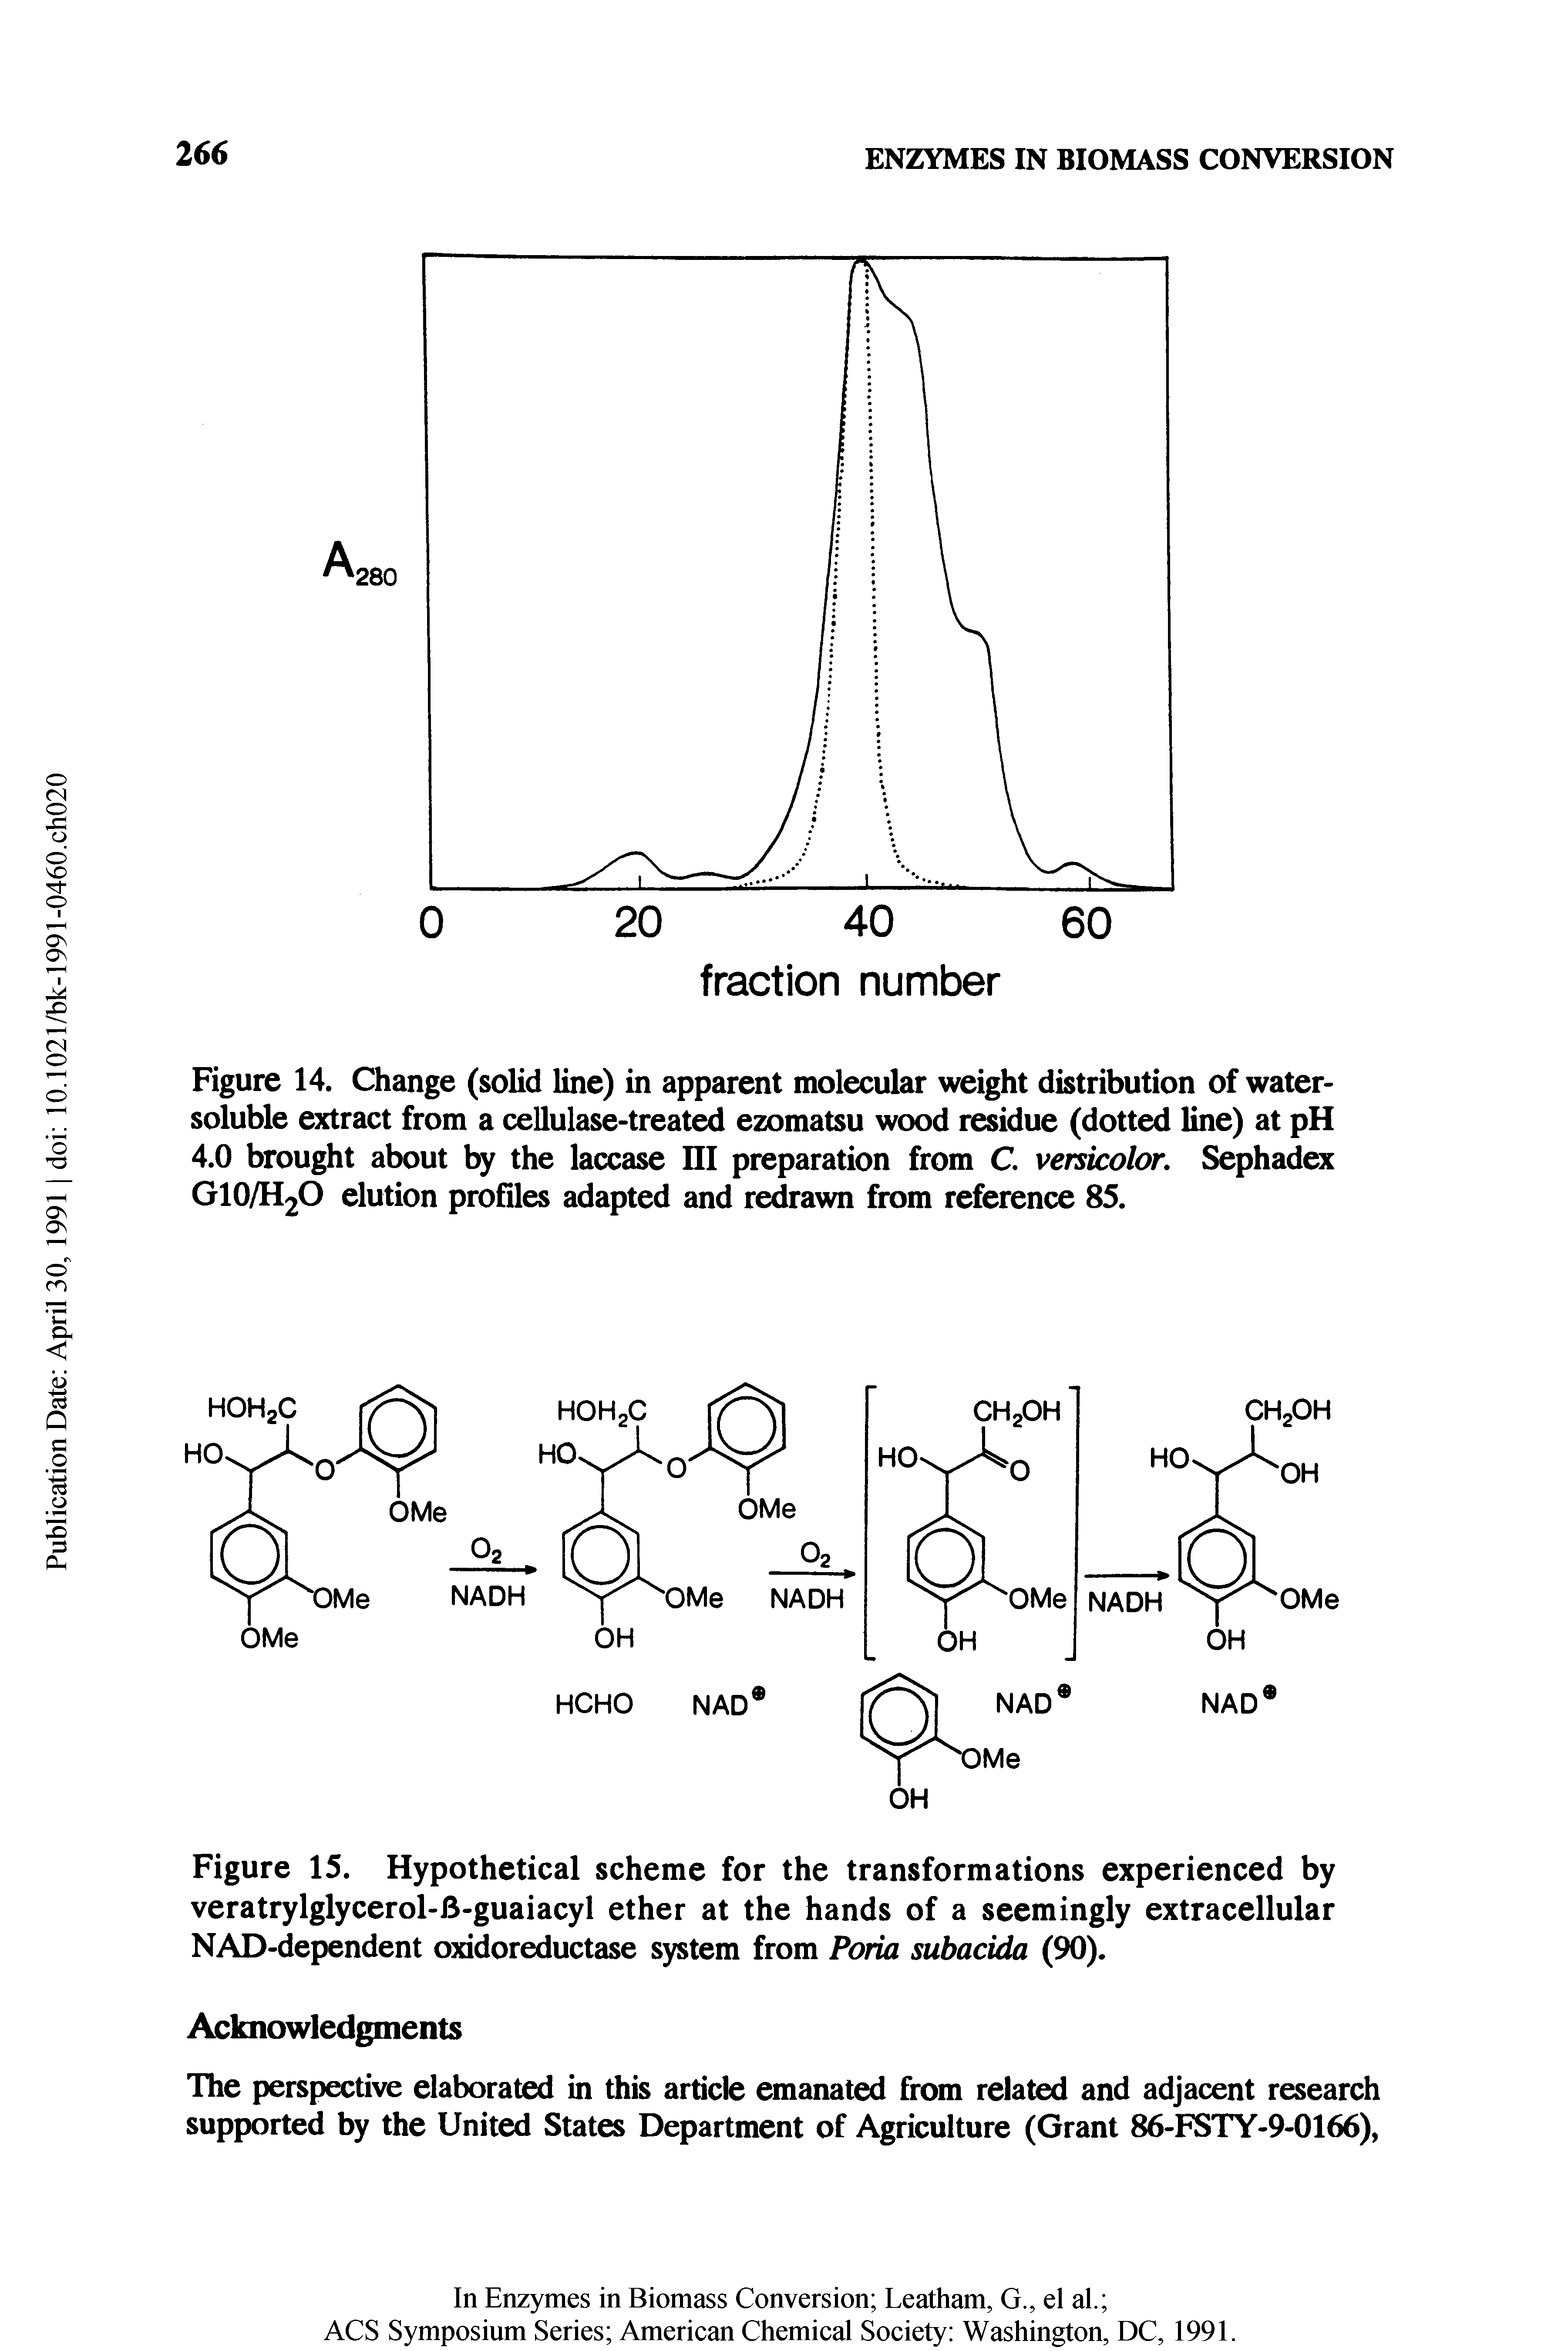 Figure 14. Change (solid line) in apparent molecular weight distribution of water-soluble extract from a cellulase-treated ezomatsu wood residue (dotted line) at pH 4.0 brought about by the laccase HI preparation from C. versicolor, Sephadex GIO/H2O elution profiles adapted and redrawn from reference 85.